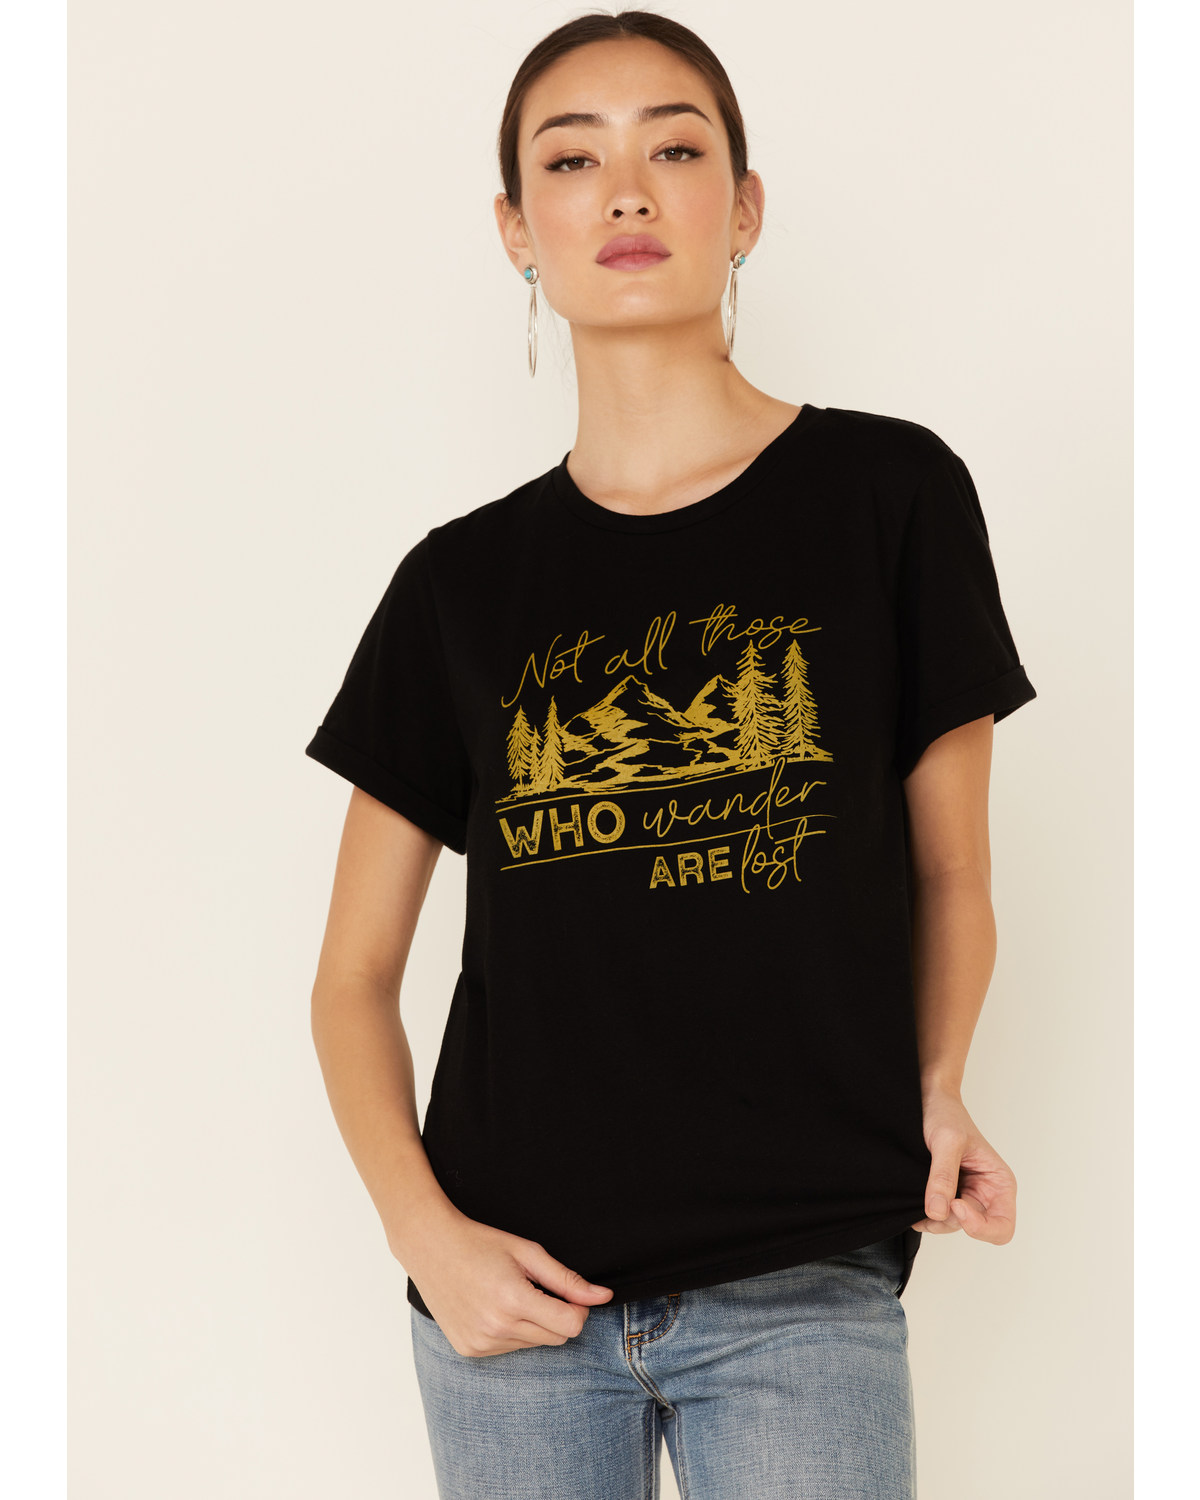 Cut & Paste Women's Not All Those Who Wander Are Lost Graphic Short Sleeve Tee